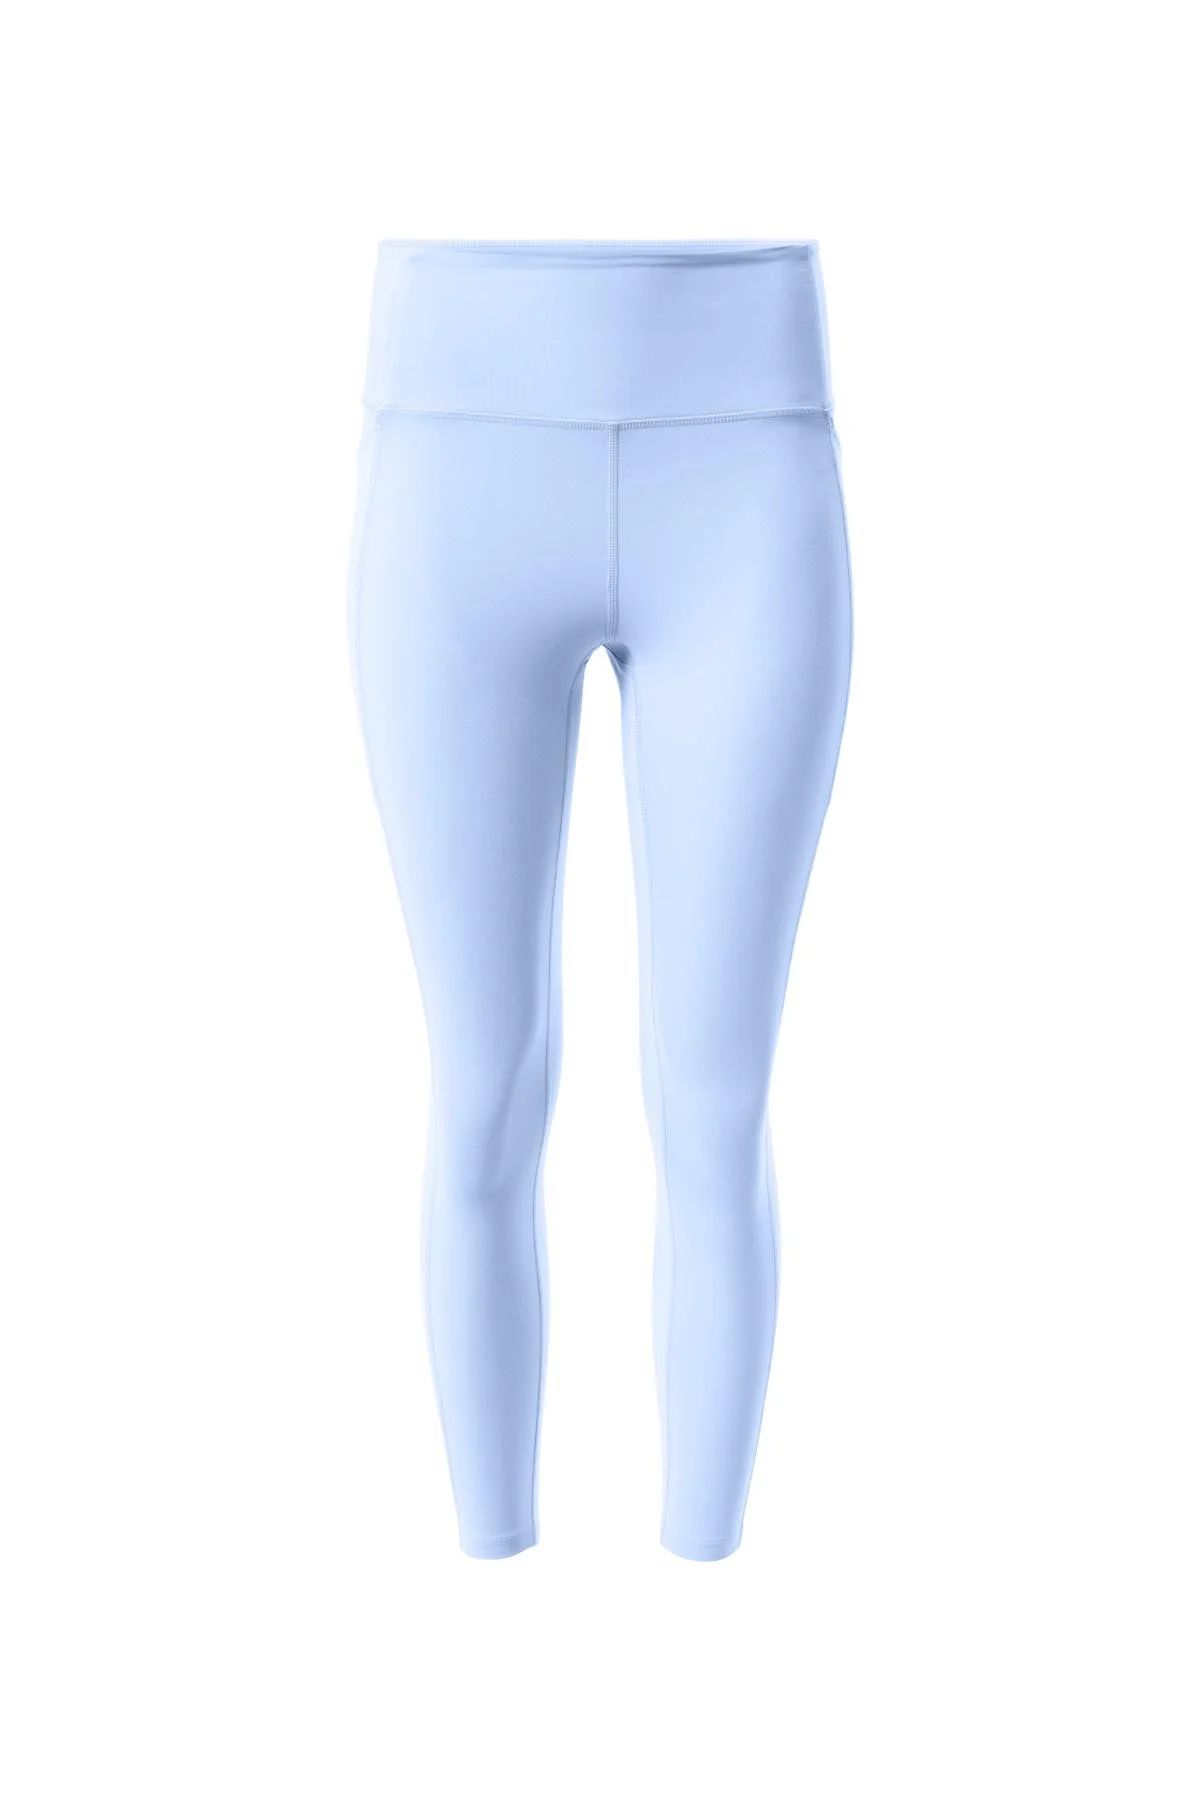 Droplet Compressive High-Rise Legging | Girlfriend Collective